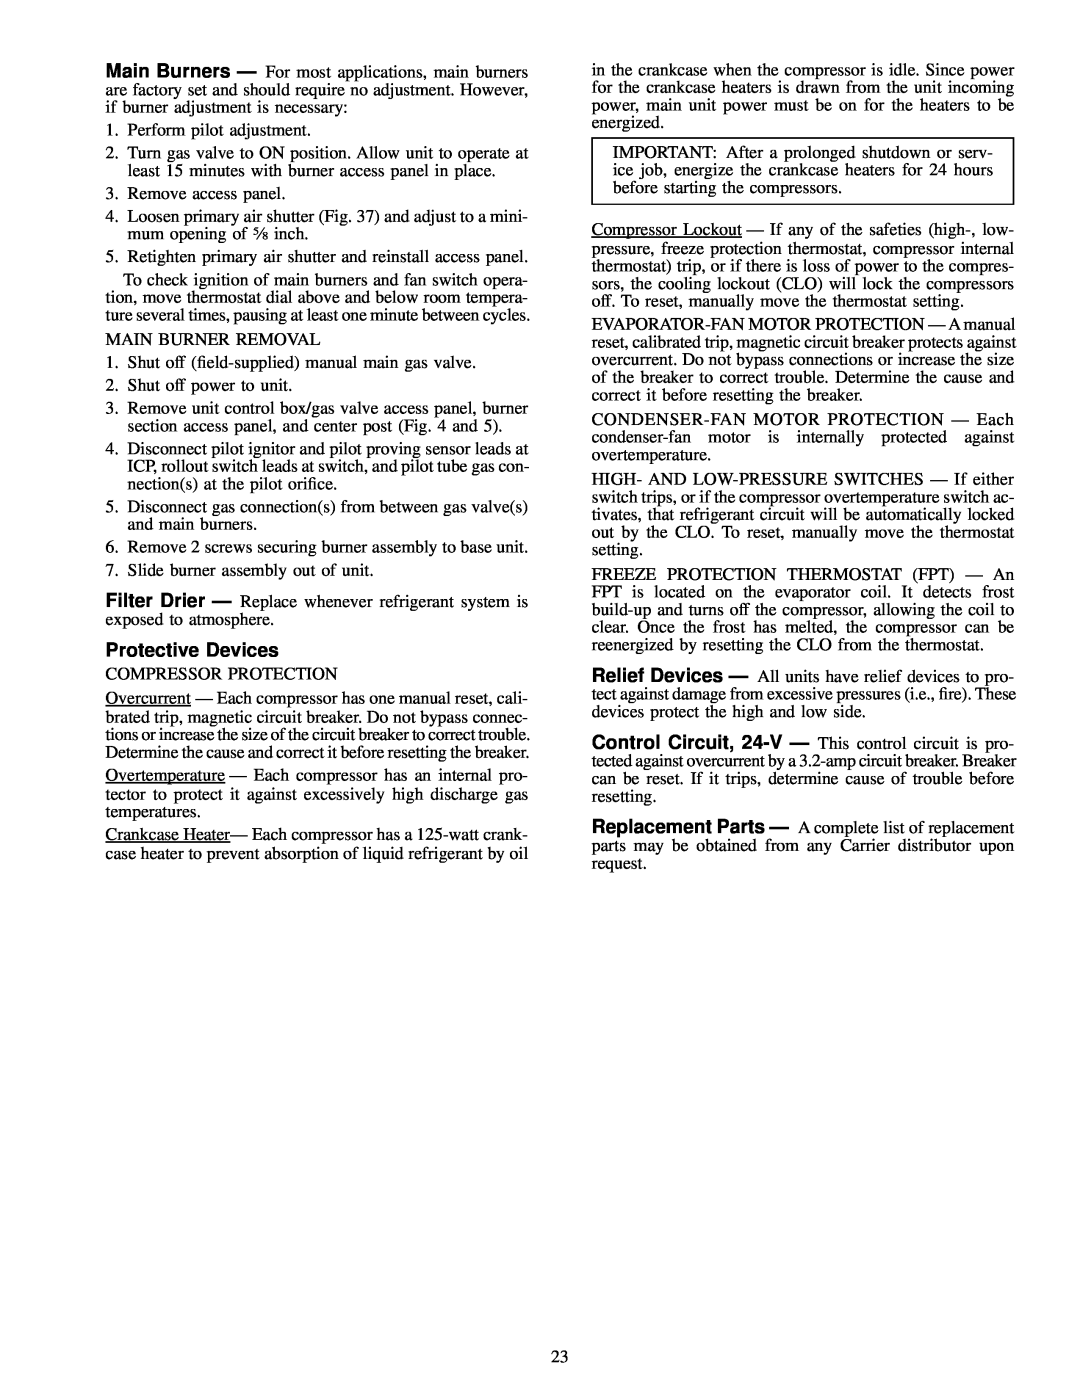 Carrier 48HJ015-025 installation instructions Protective Devices 